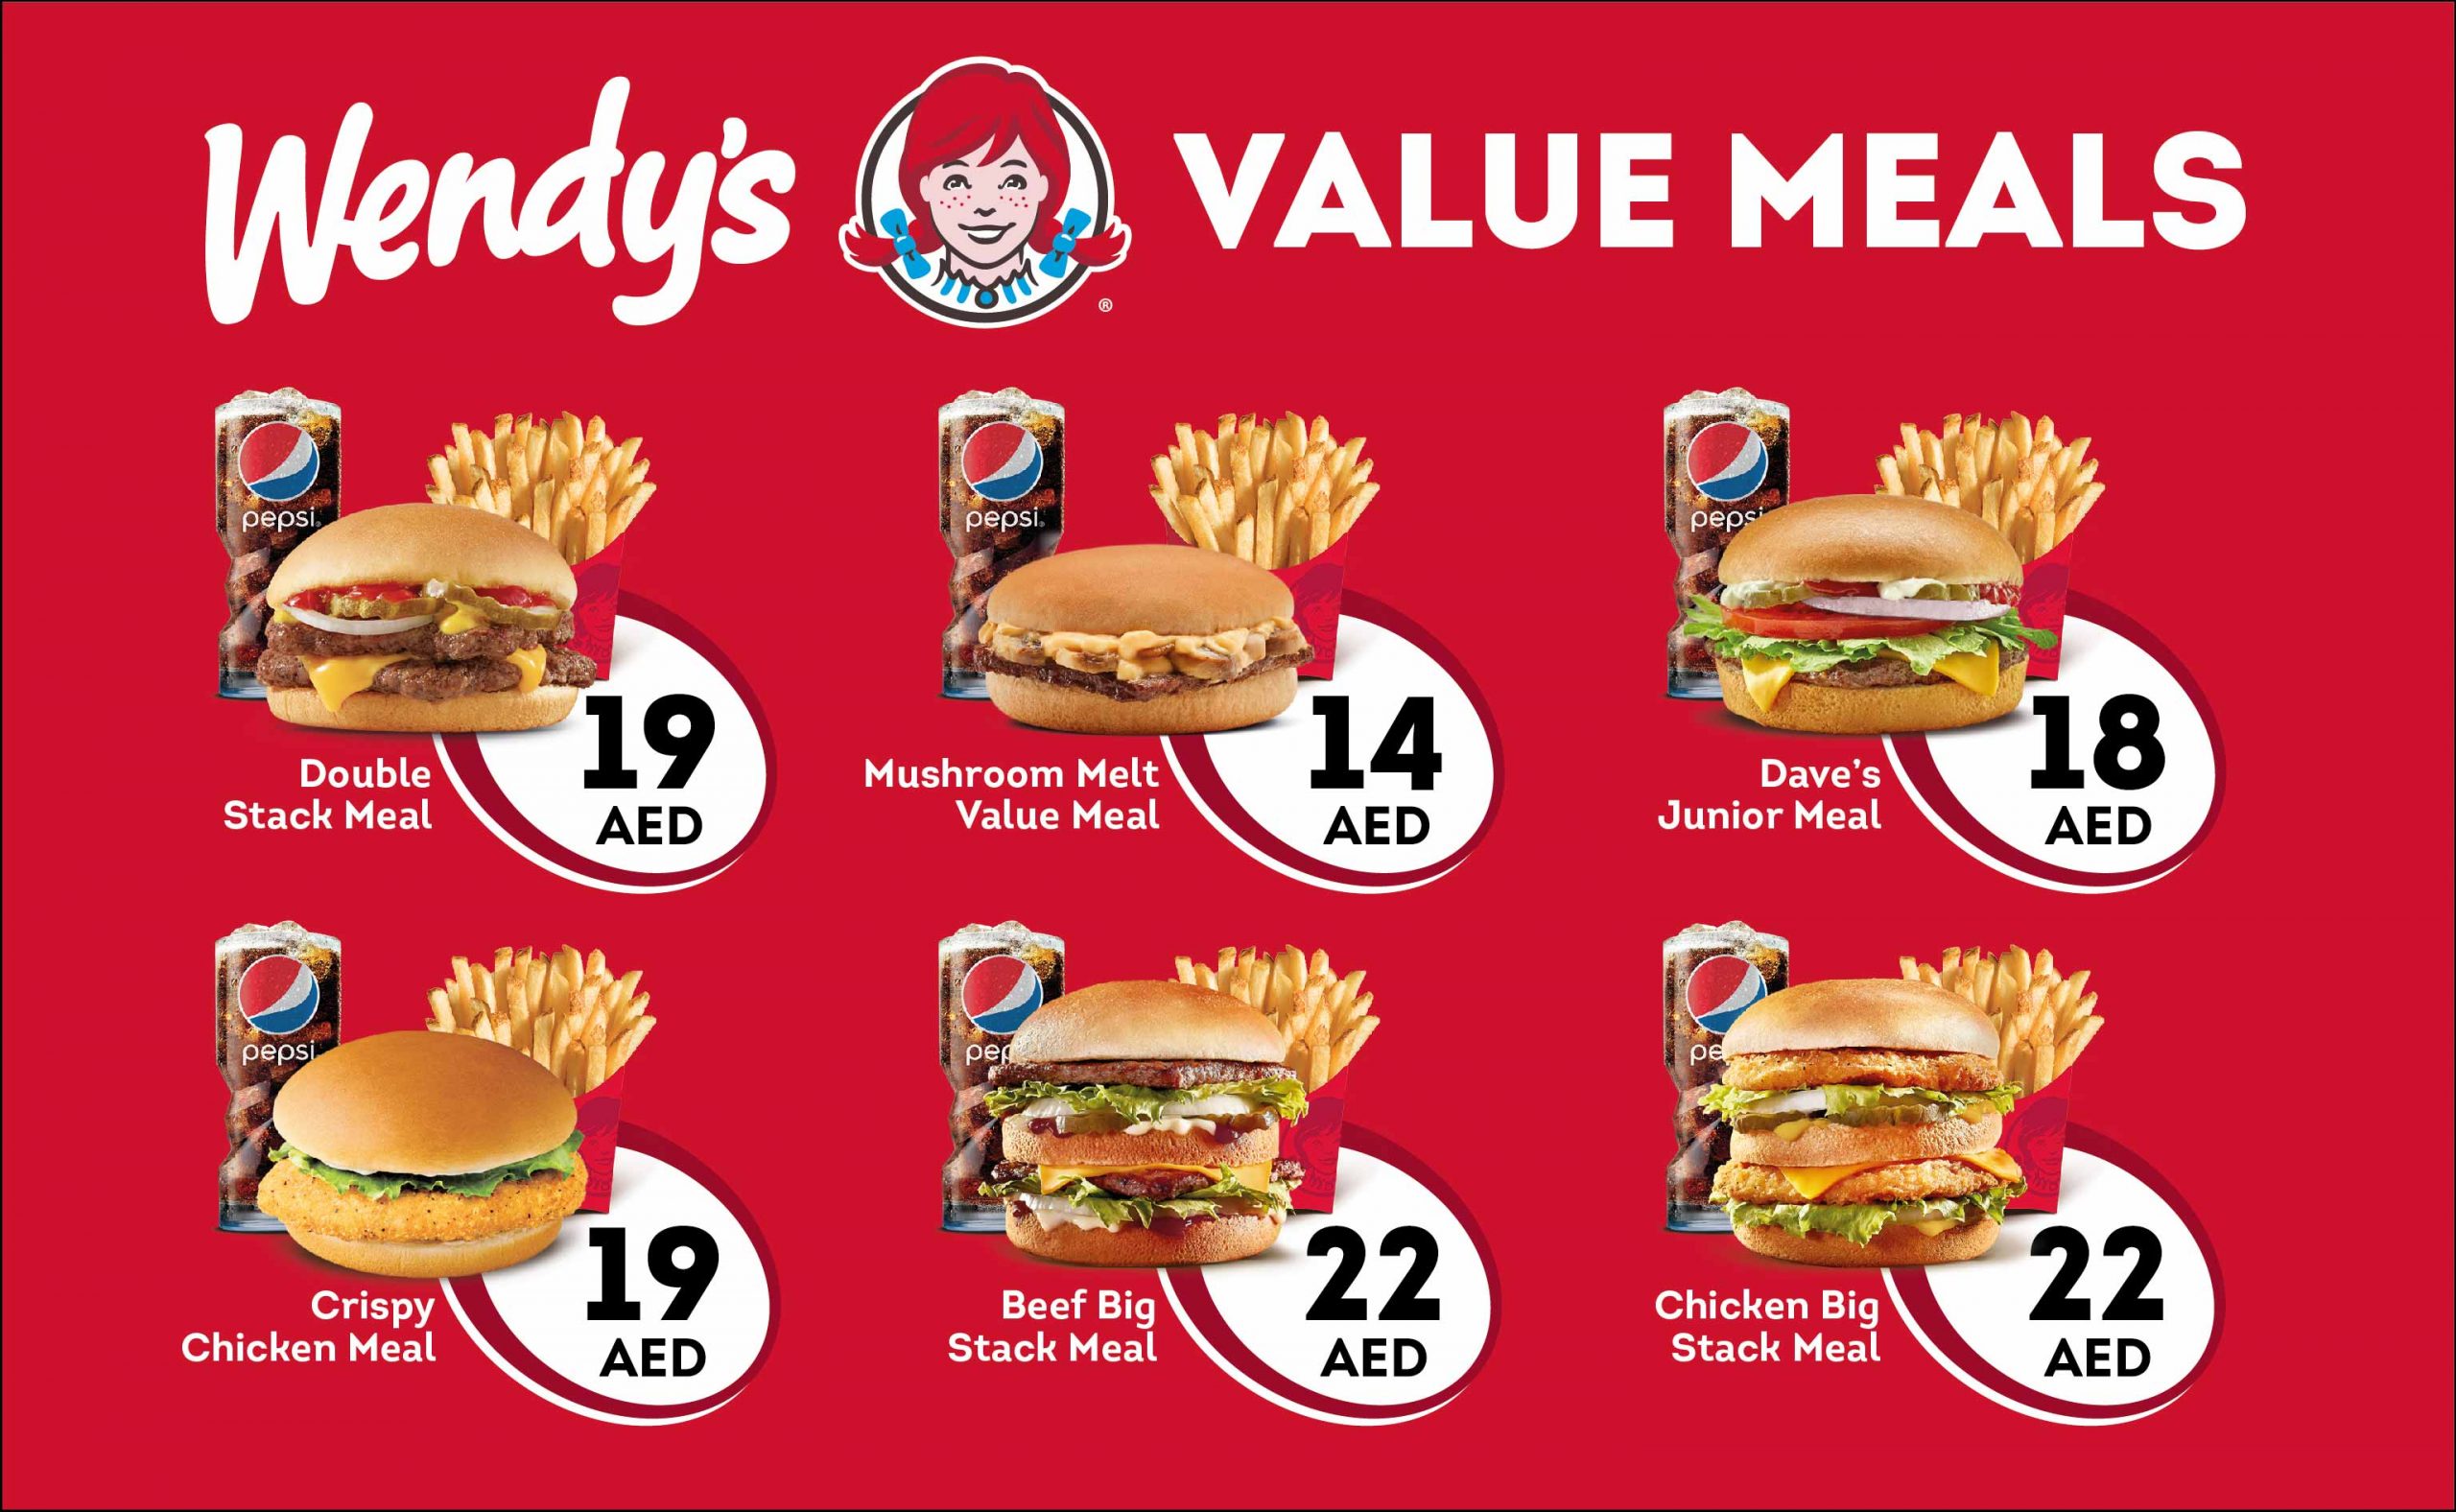 Wendy’s top six value meals that pack quality flavors in affordable